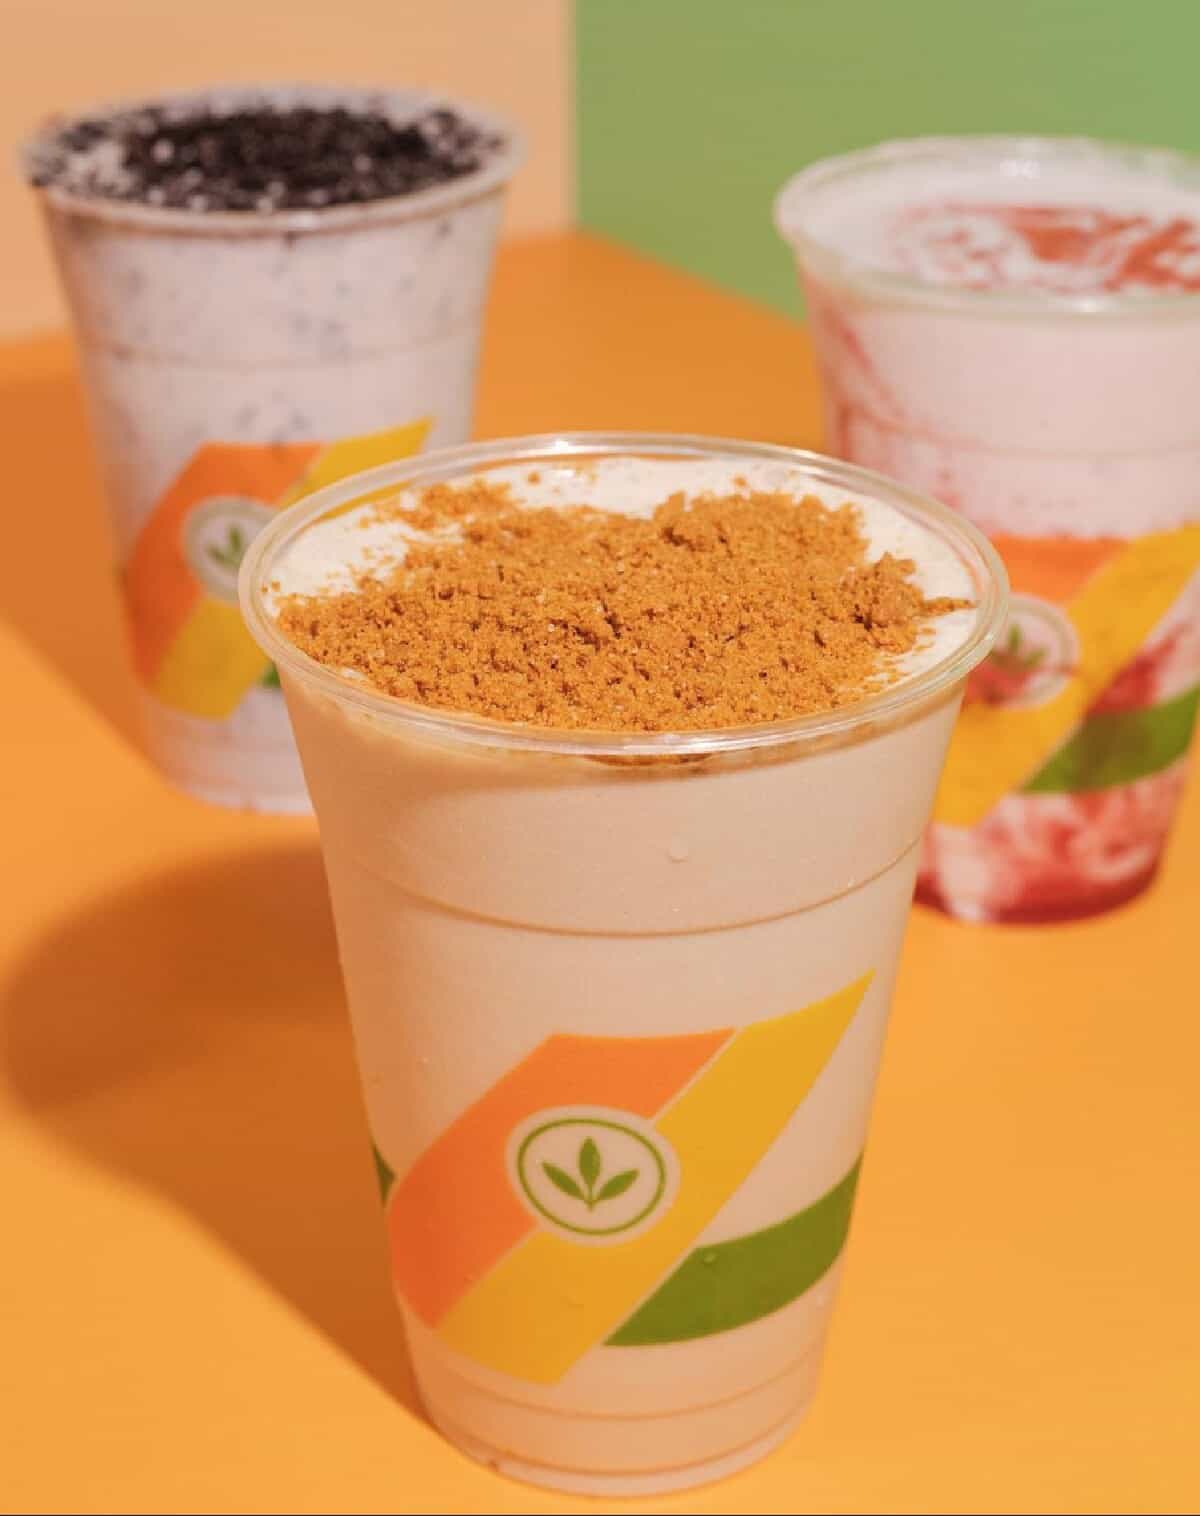 Three Plant Power Fast Food milkshakes in clear plastic cups with different toppings on an orange countertop with a green background.